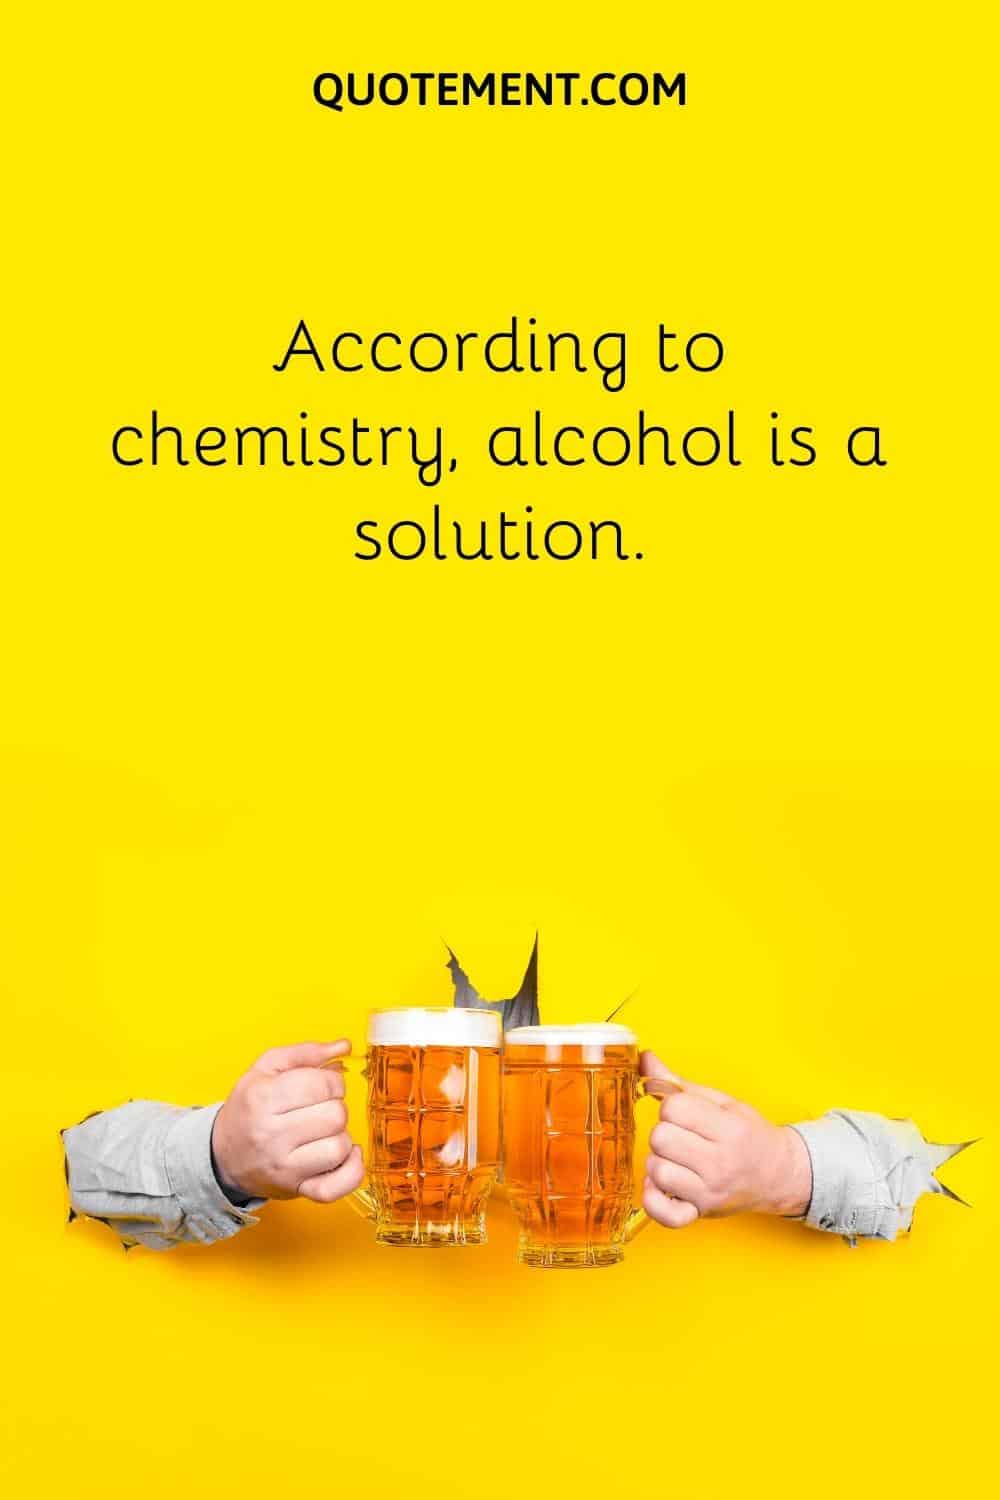 According to chemistry, alcohol is a solution.